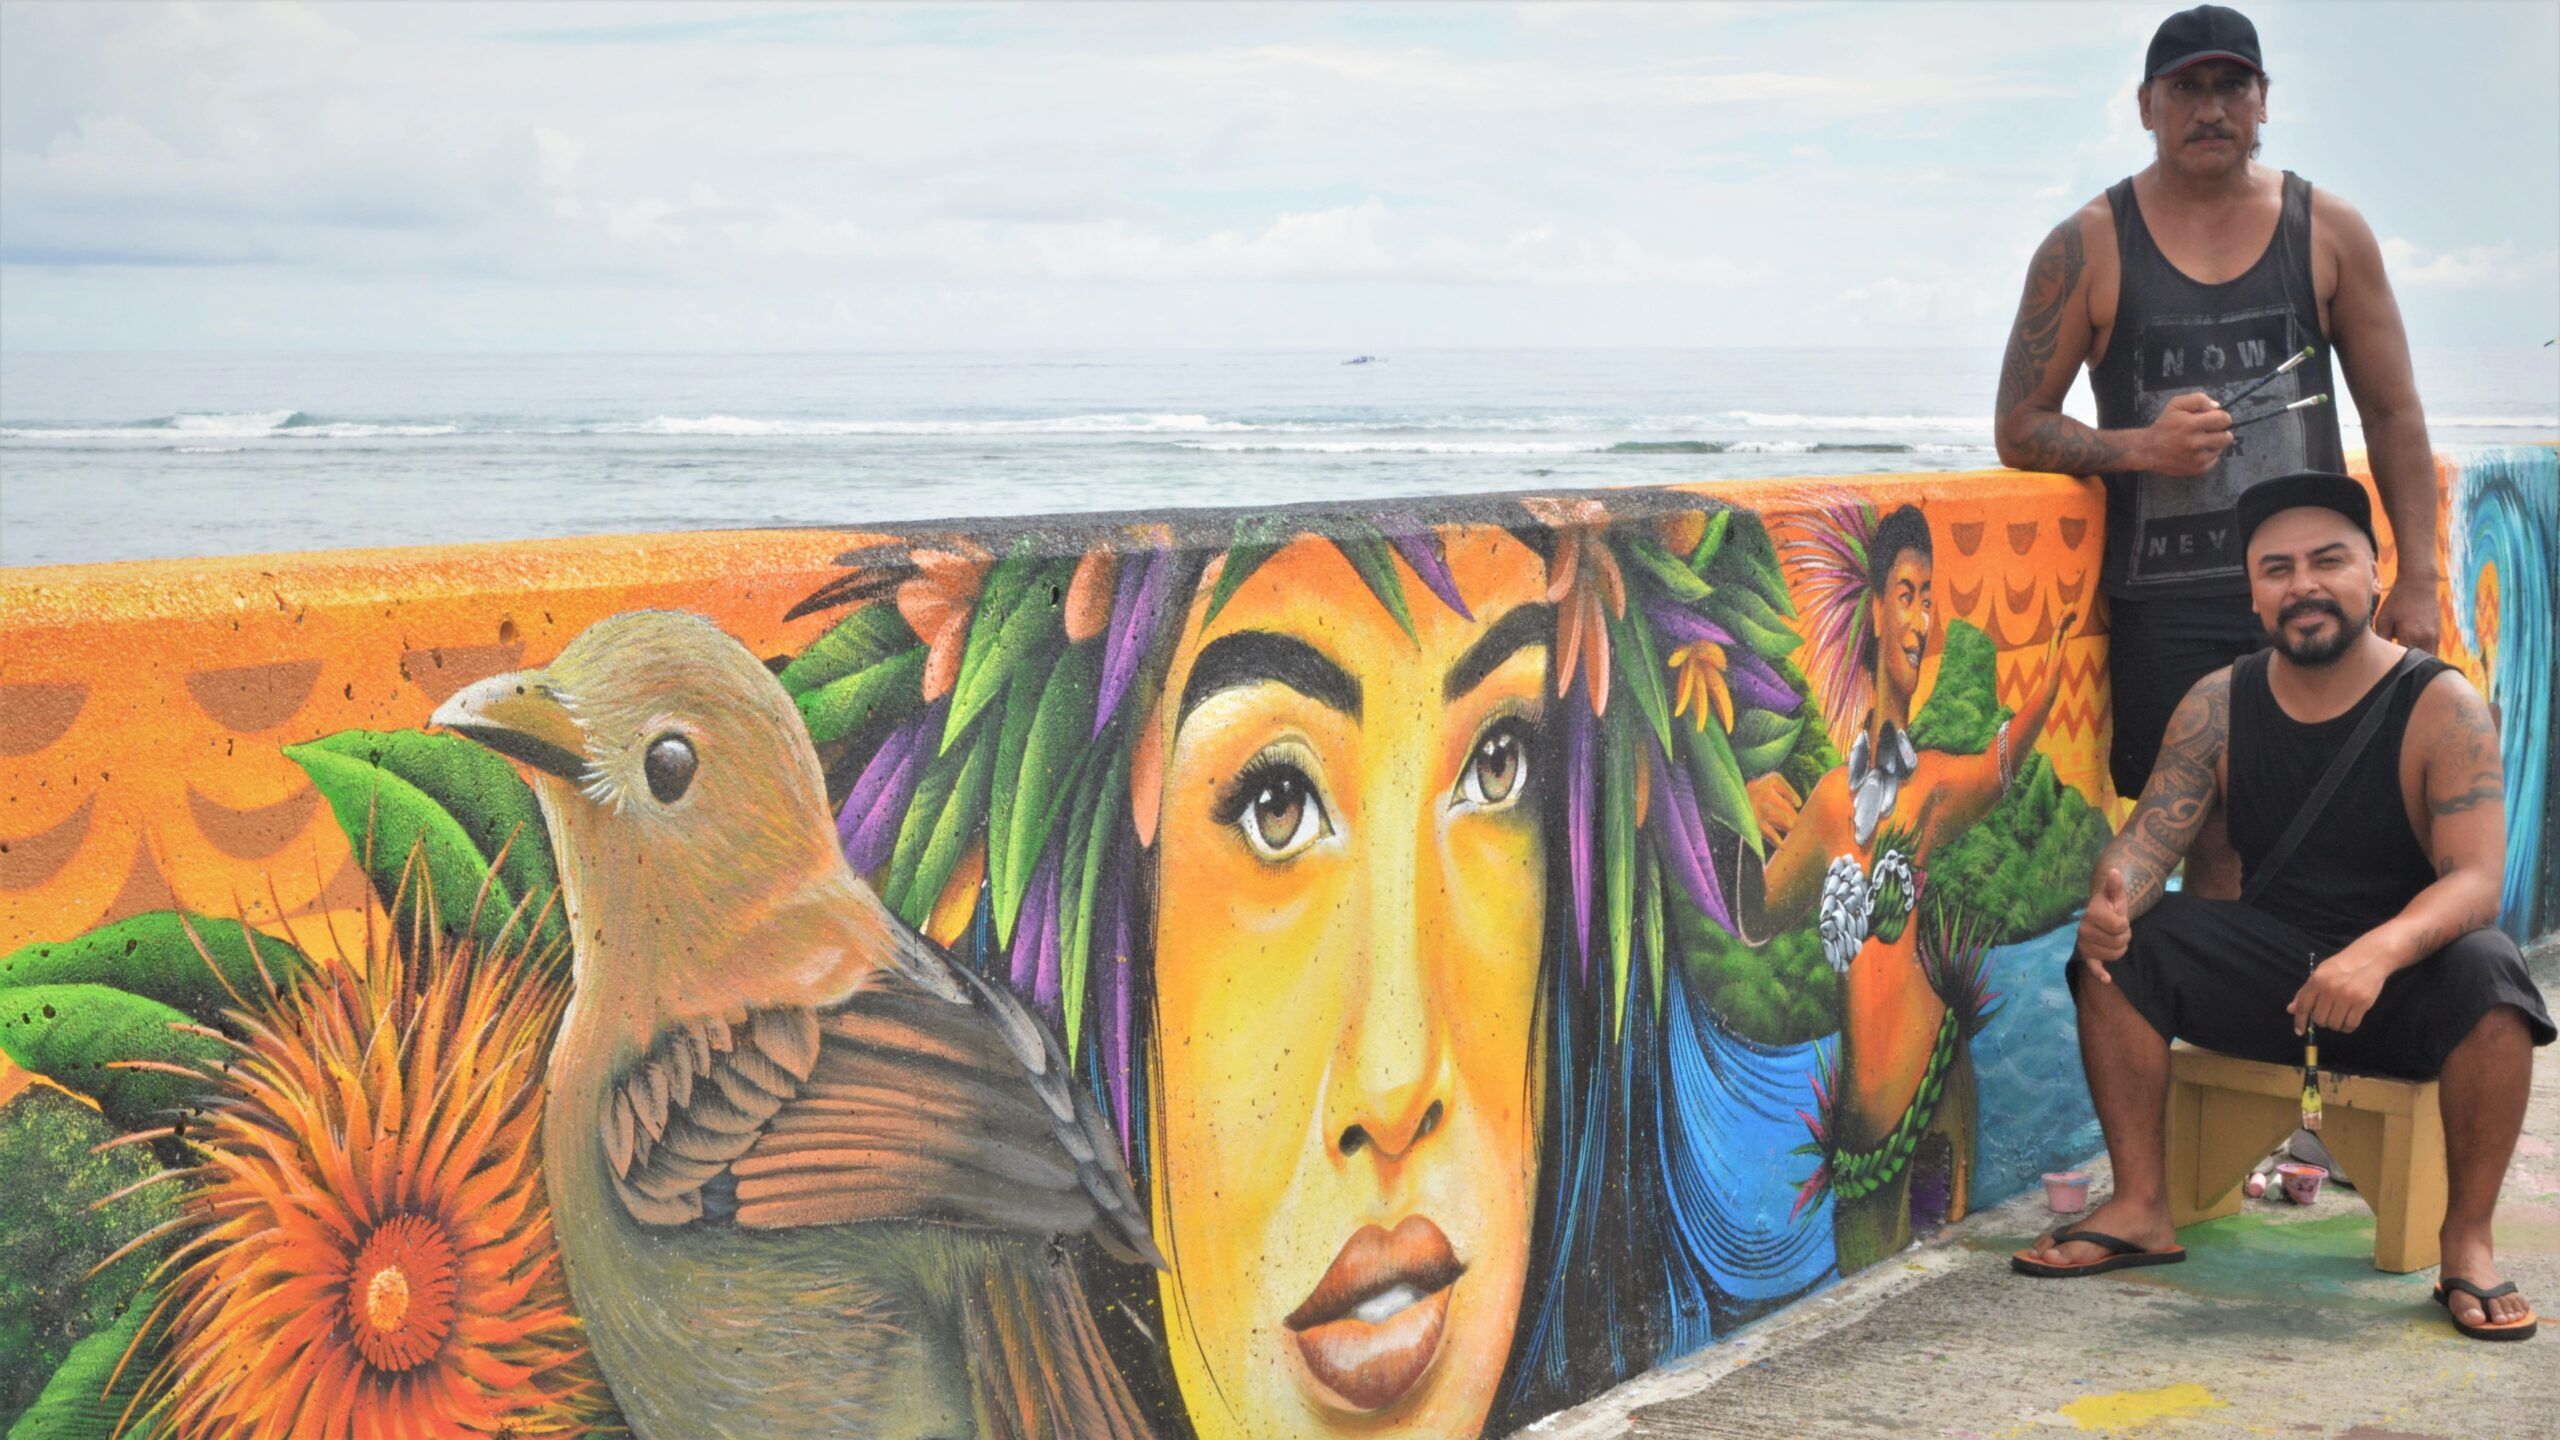 Nikao Seawall Mural Continues To Delight – Cook Islands News Intended For Current The Seawall Art (View 9 of 20)